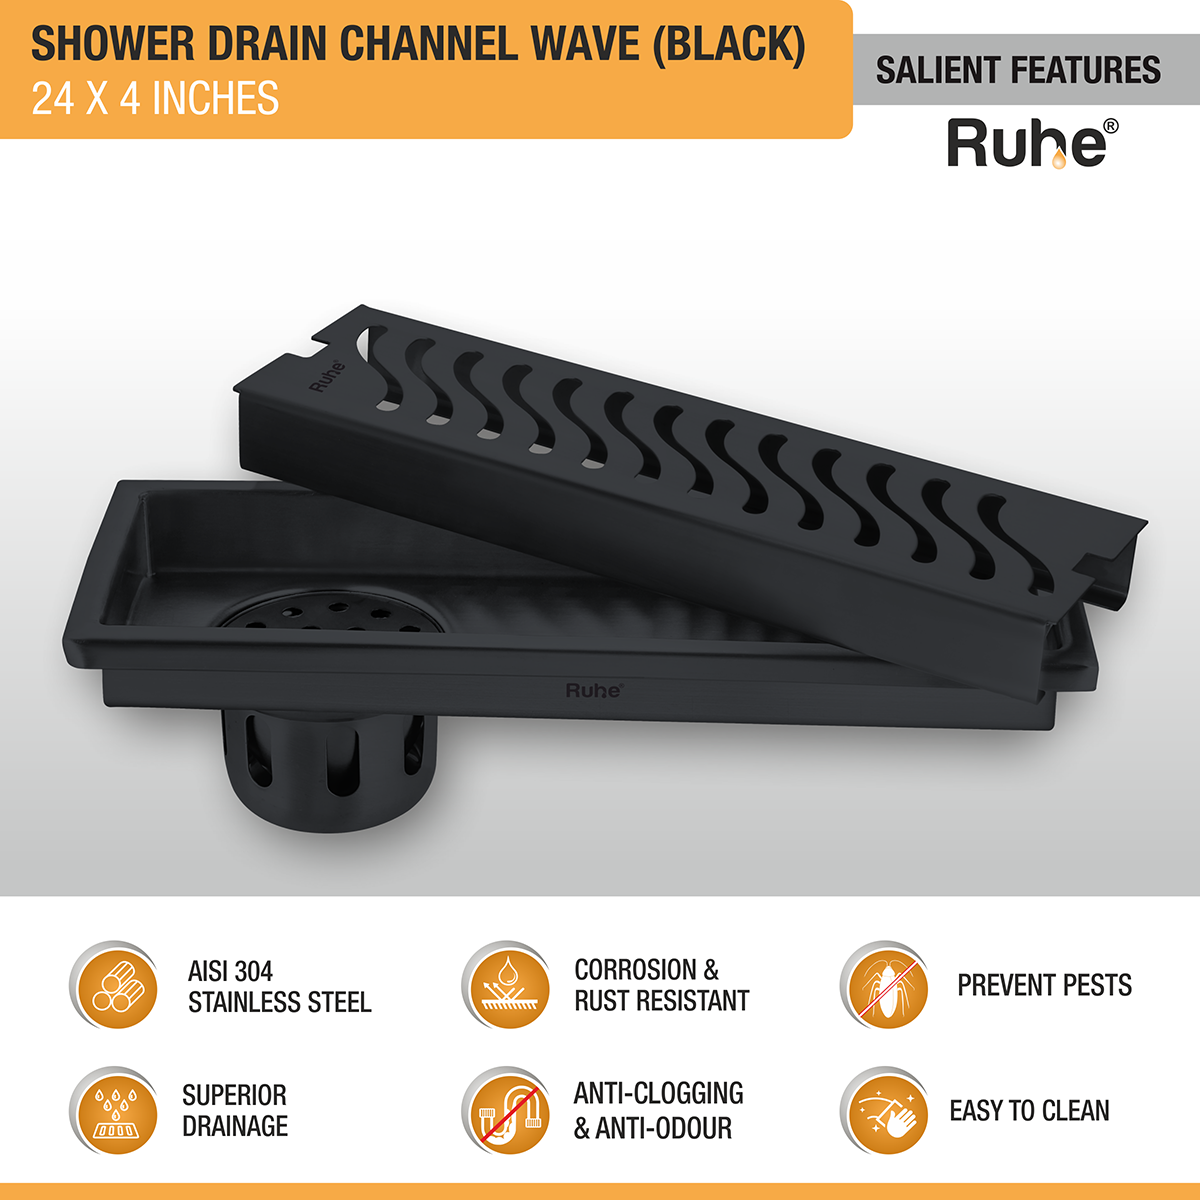 Wave Shower Drain Channel (24 x 4 Inches) Black PVD Coated features and benefits